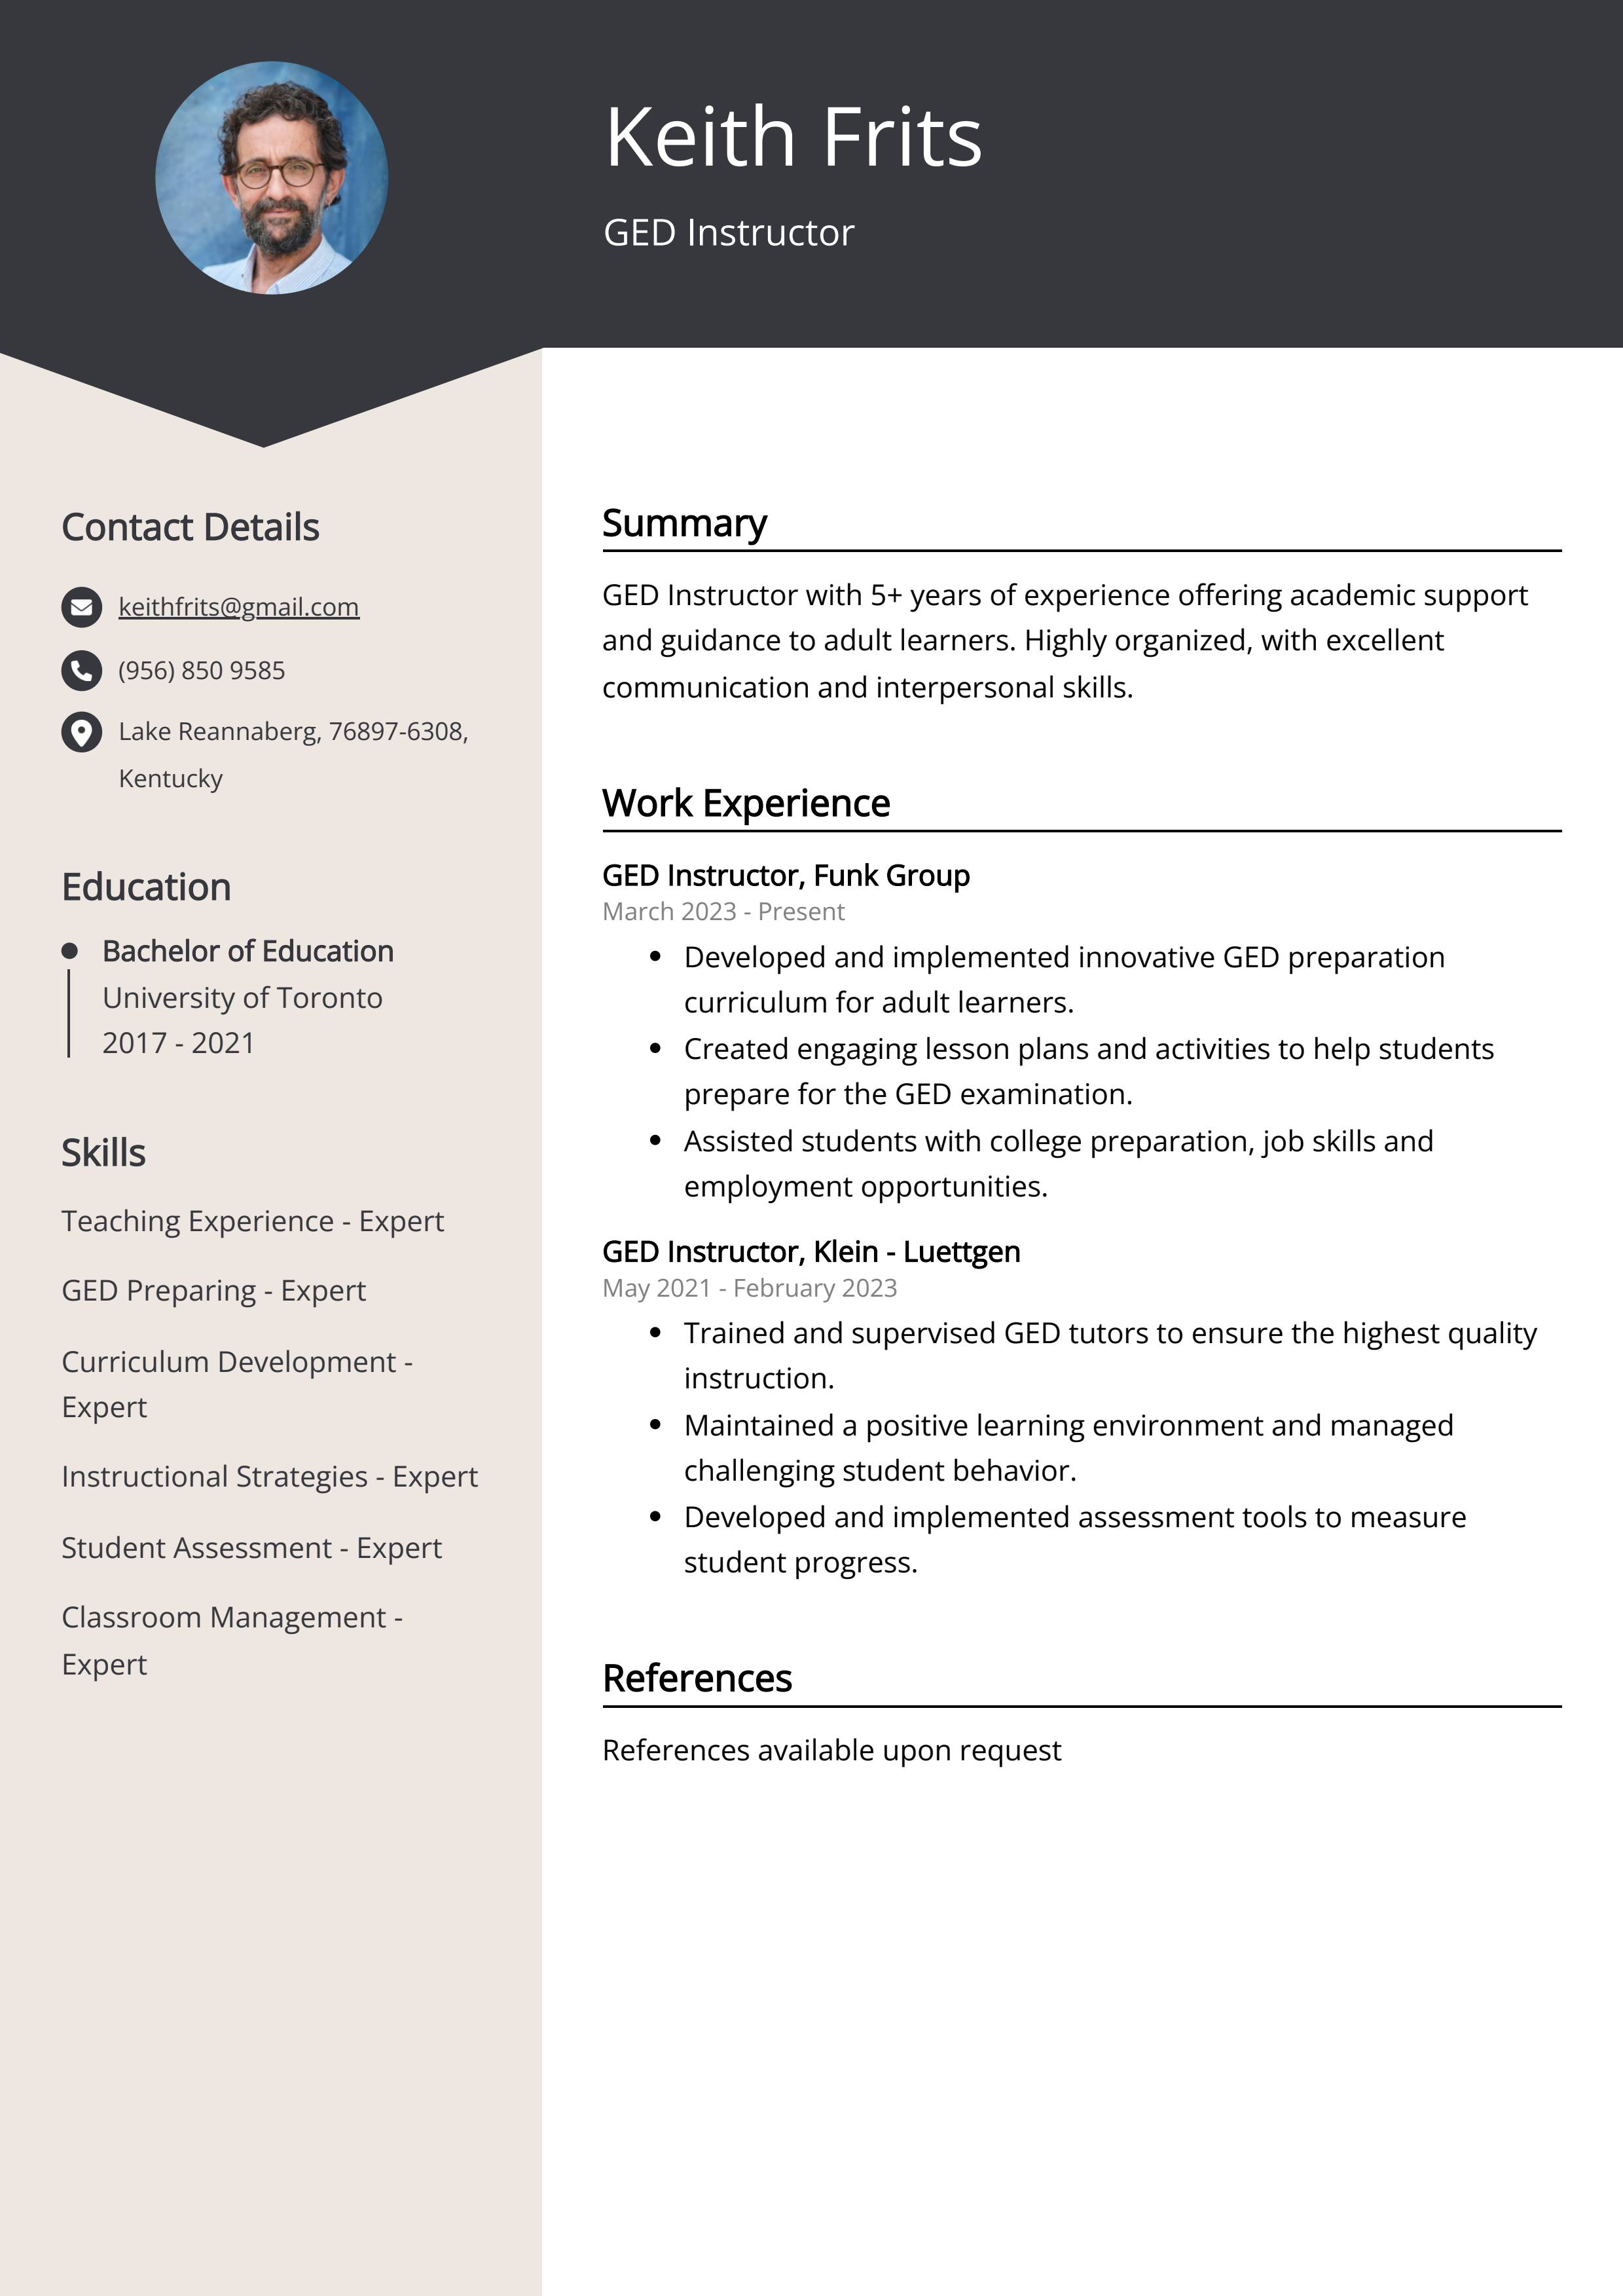 GED Instructor CV Example